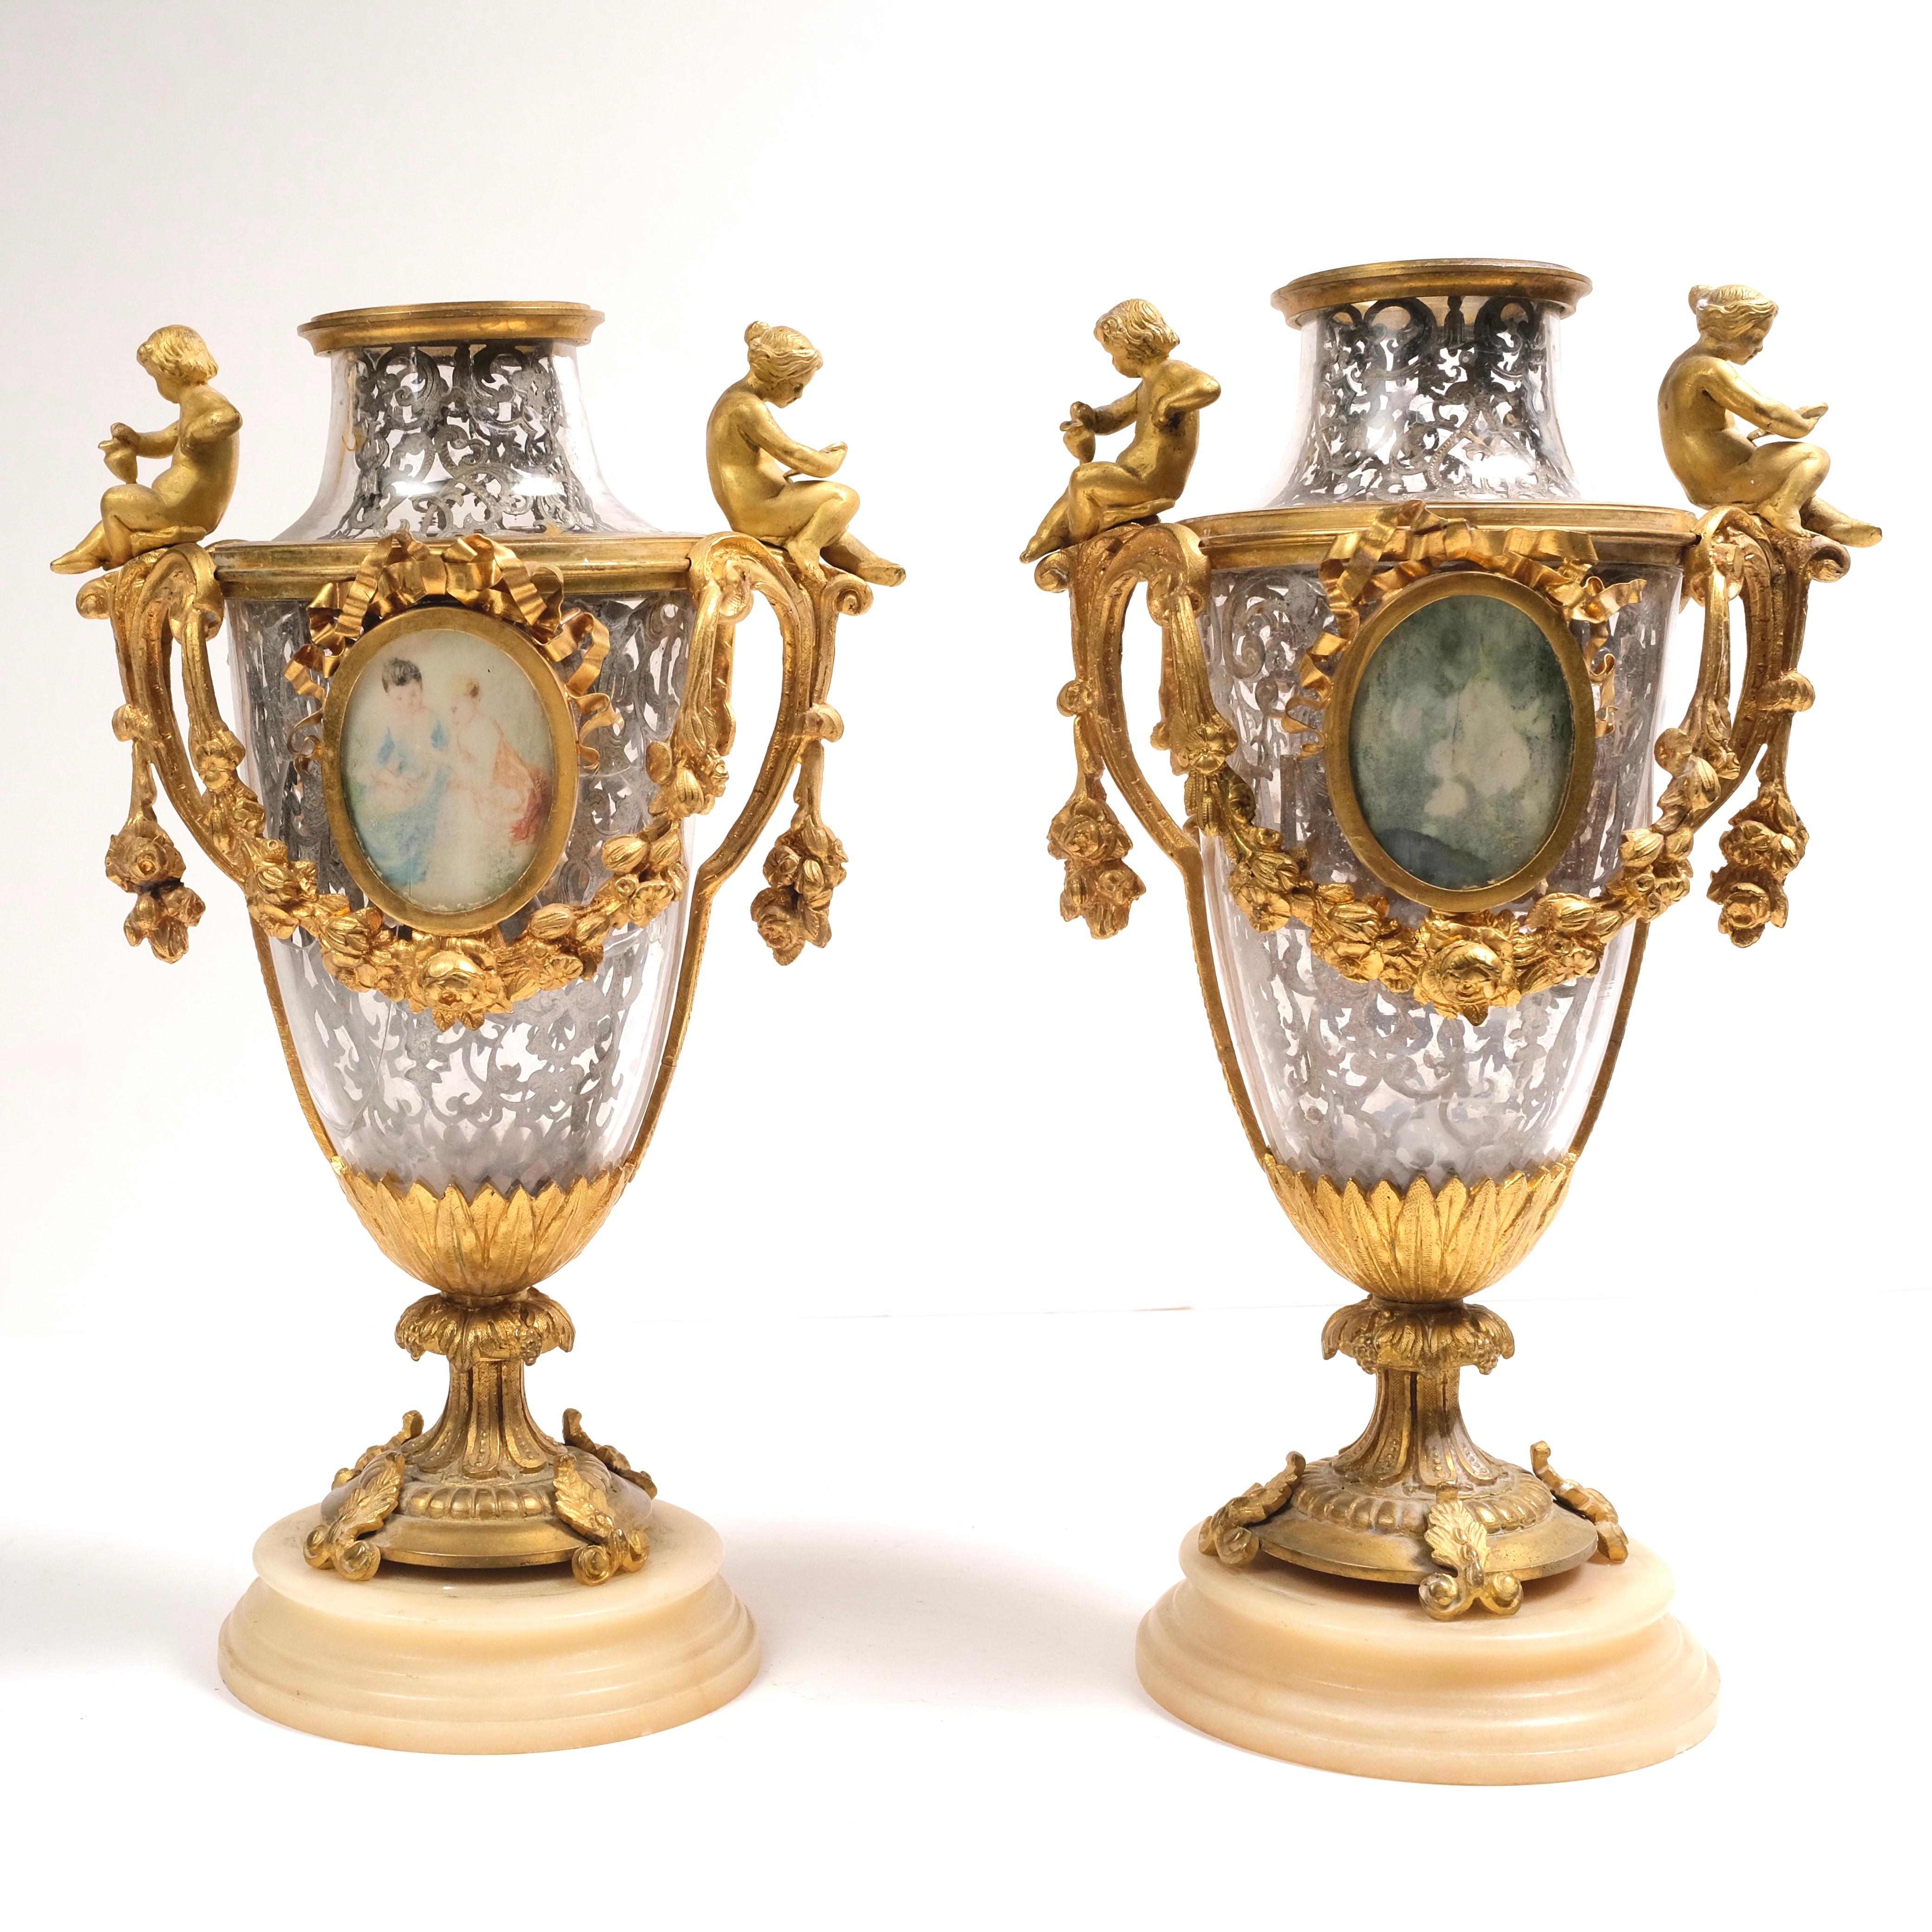 Dore bronze with silver filigree on the inside of the glass vase. One glass is cracked/broken, but is difficult to see. Marble bases.